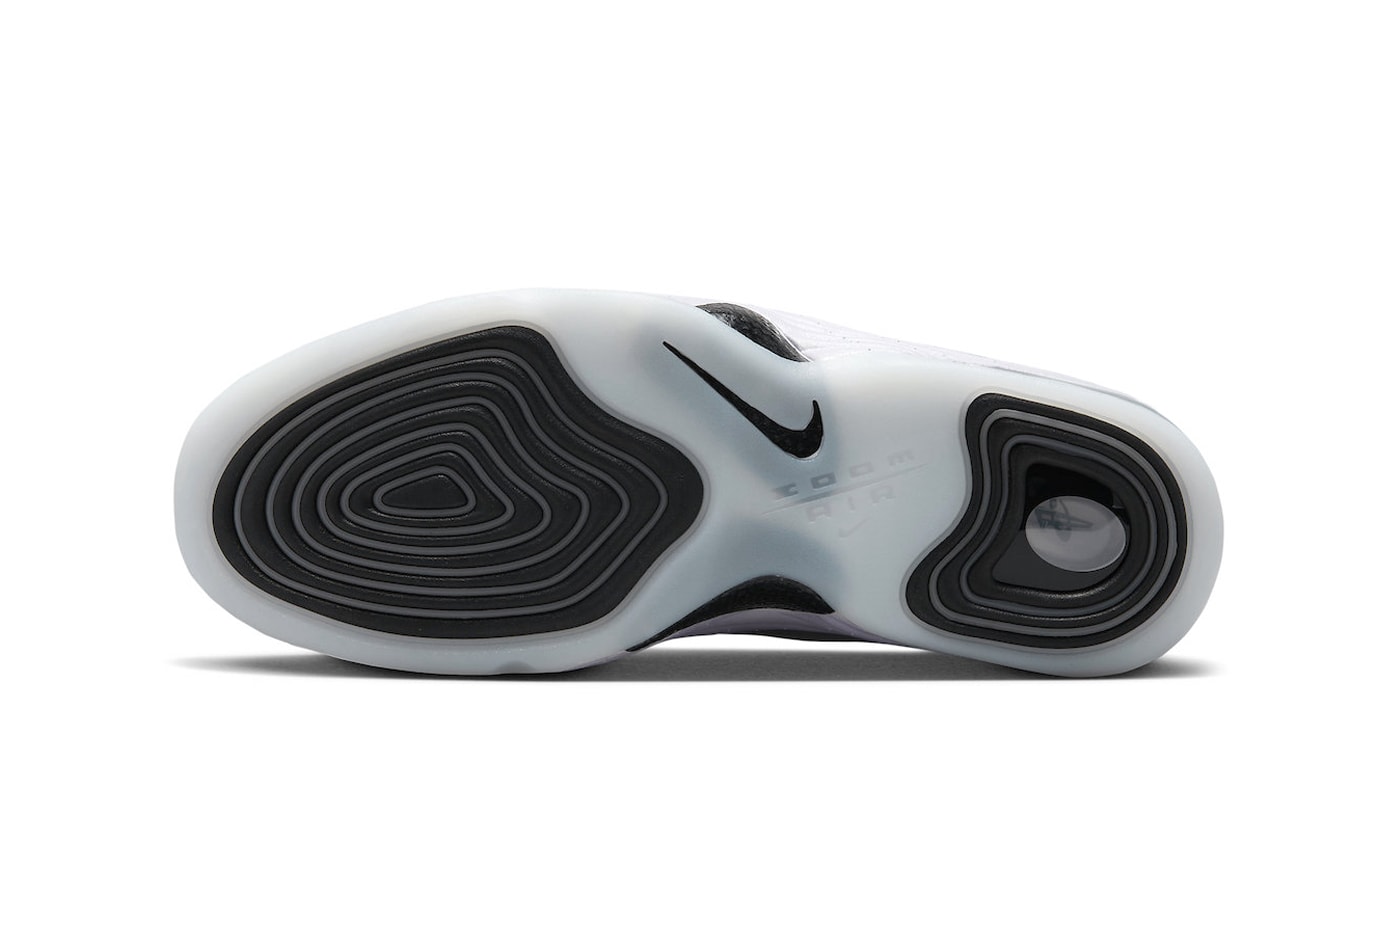 Nike Air Penny 2 Arrives in Classic "Black Patent" DV0817-001 Black/Multi Color-White-Football Grey stussy penny hardaway basketball high tops vintage aesethetic 90s february 2023 release date